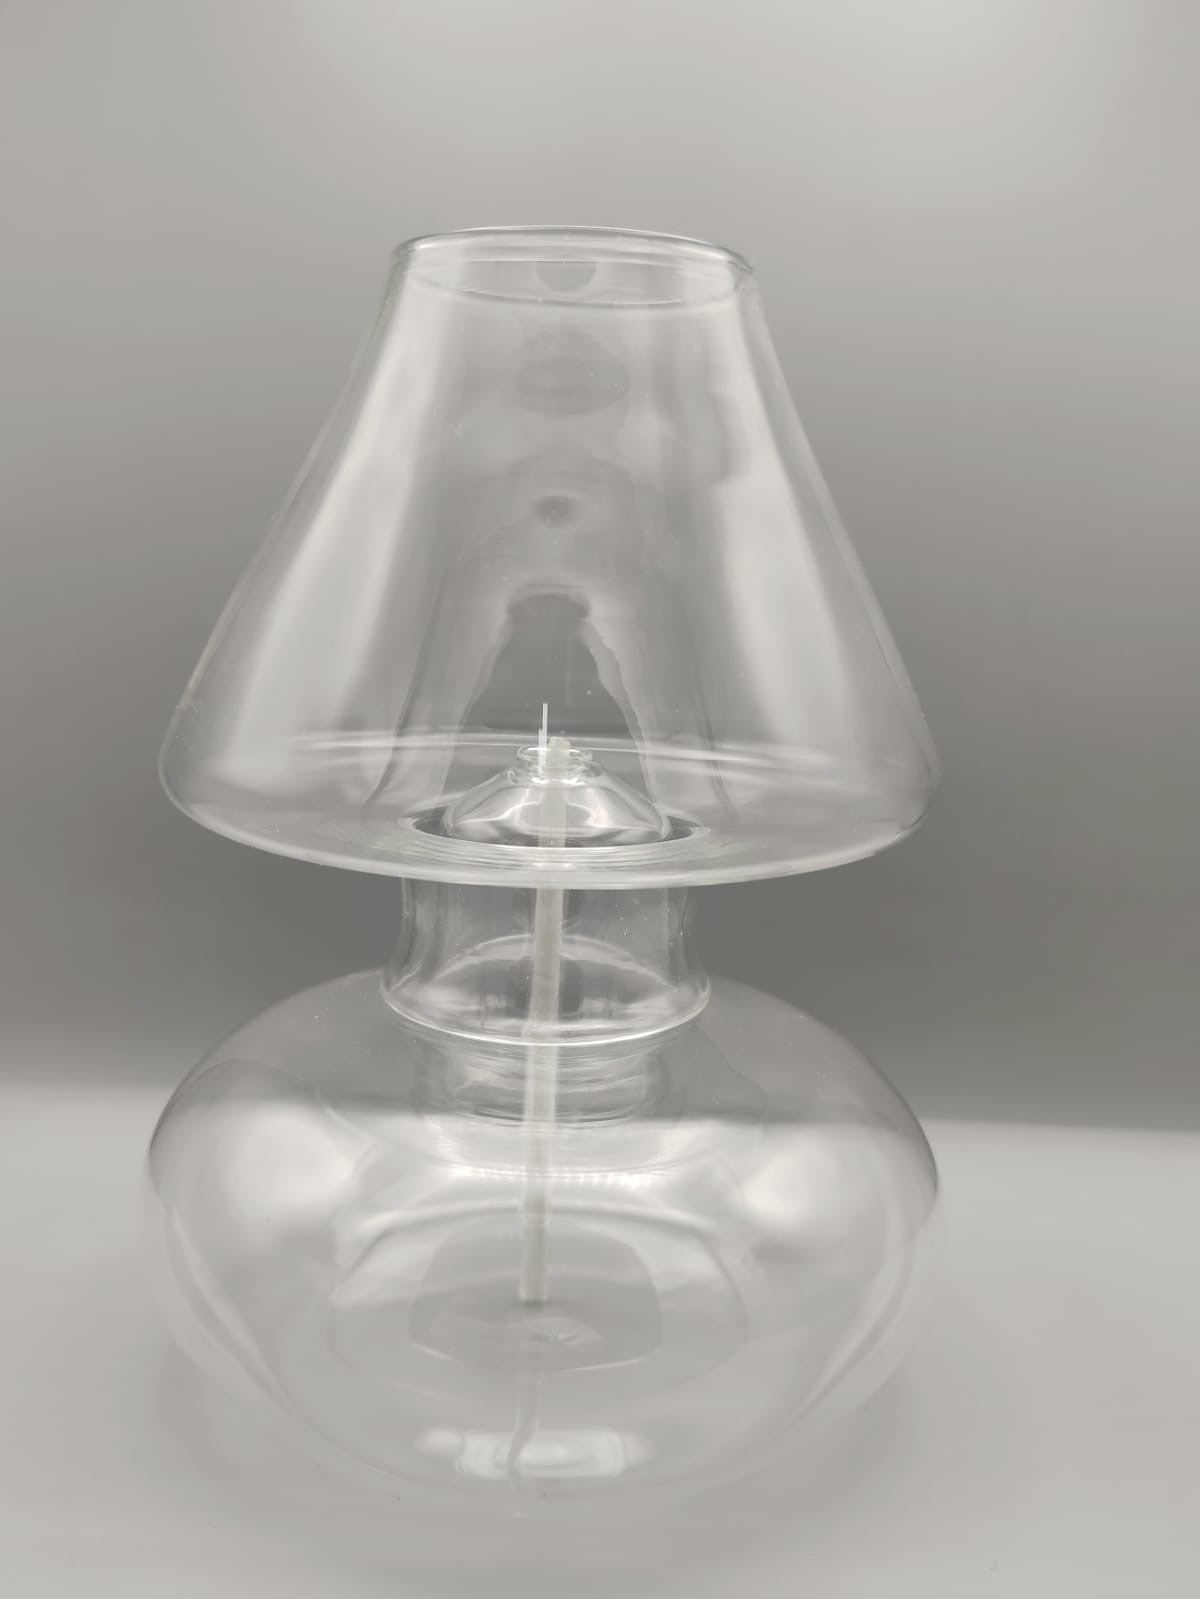 Quem Handmade Glass Oil Lampshade for indoor and Outdoor, Modern Glass Decoration for Home and Office.